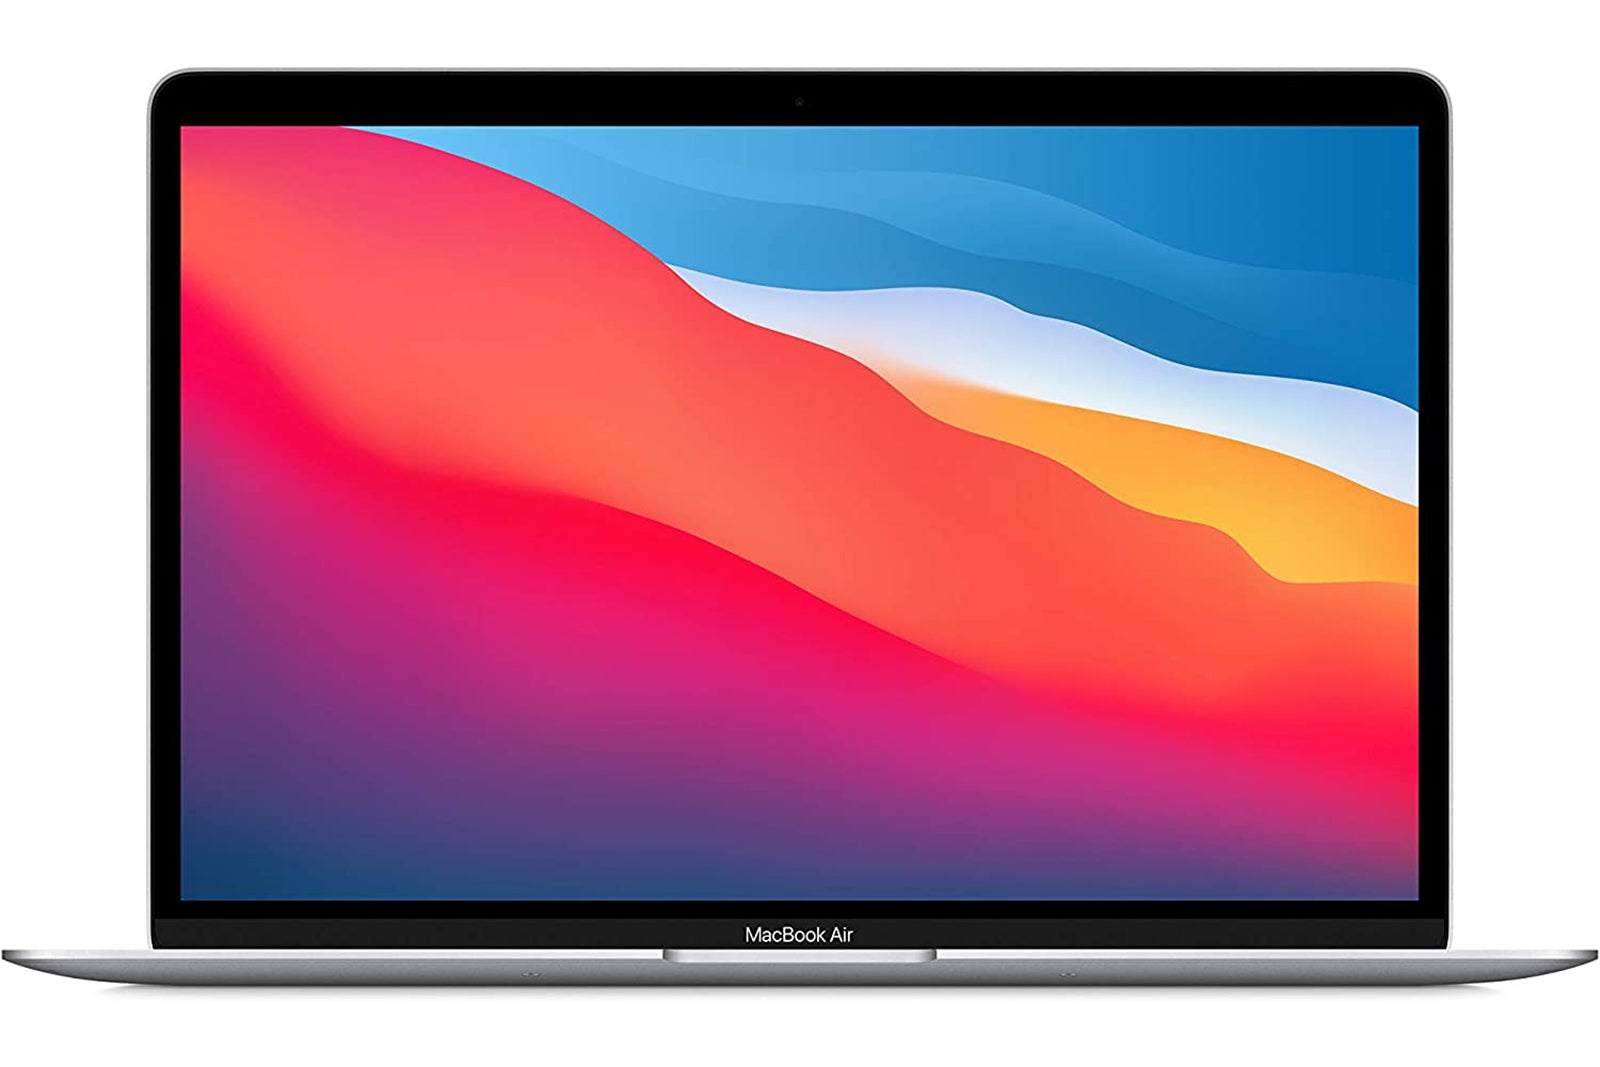 You are currently viewing 8 Apple products discounted for Amazon Prime Day